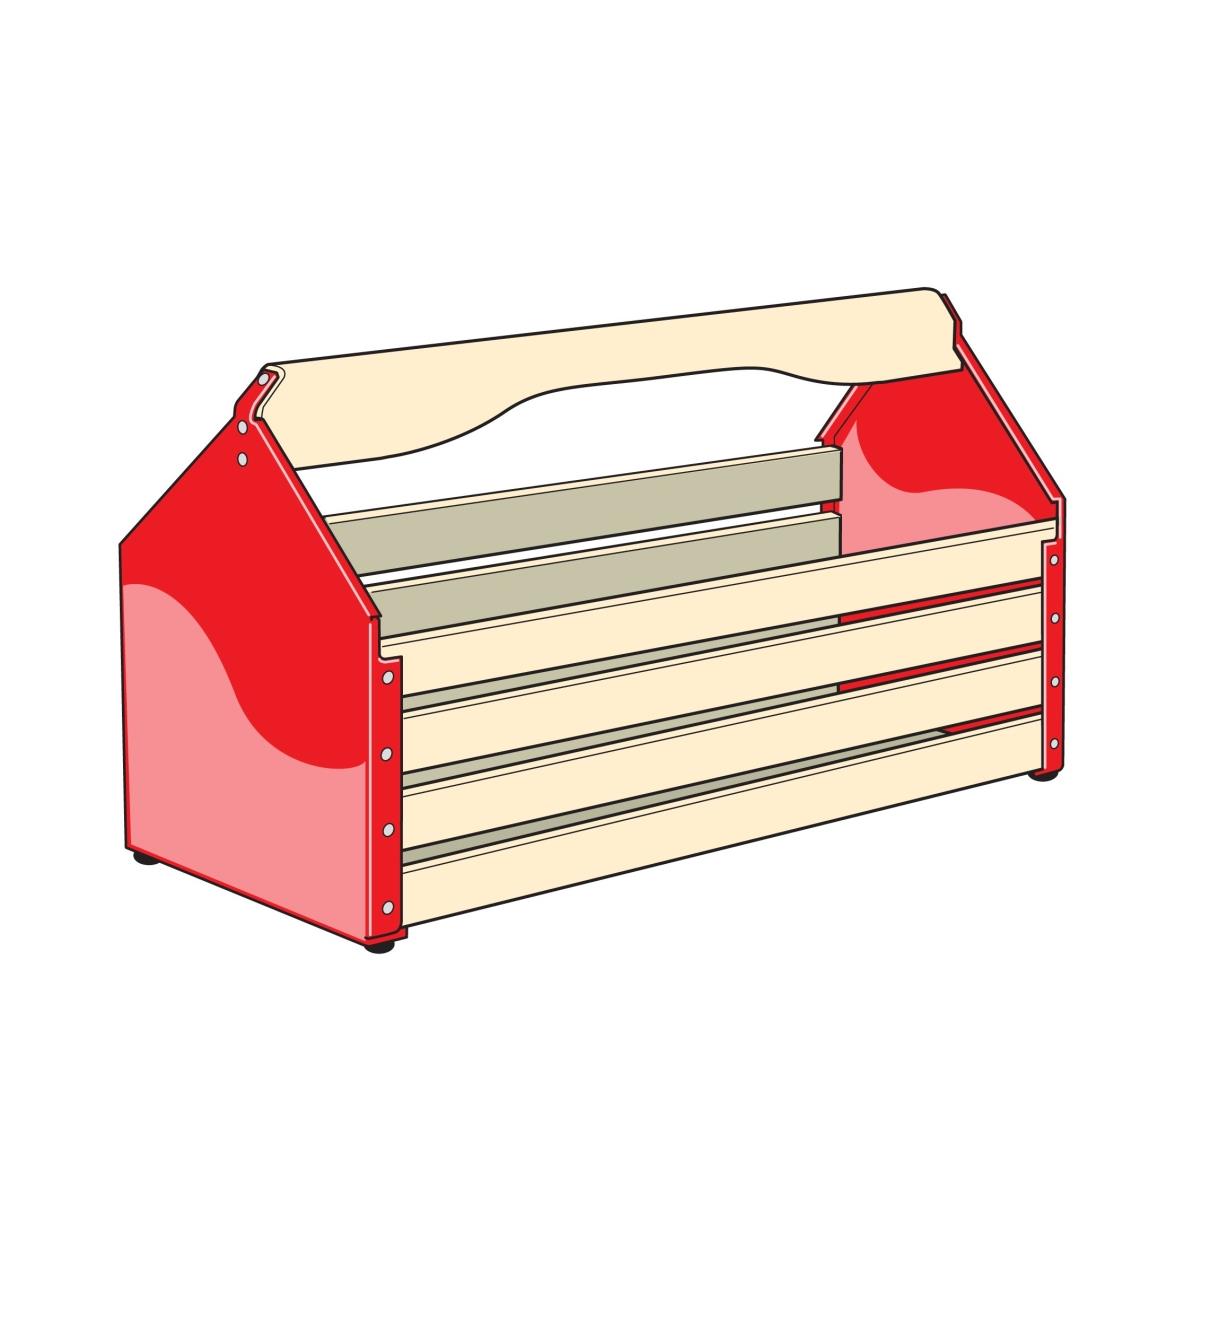 Illustration of toolbox made with slatted sides